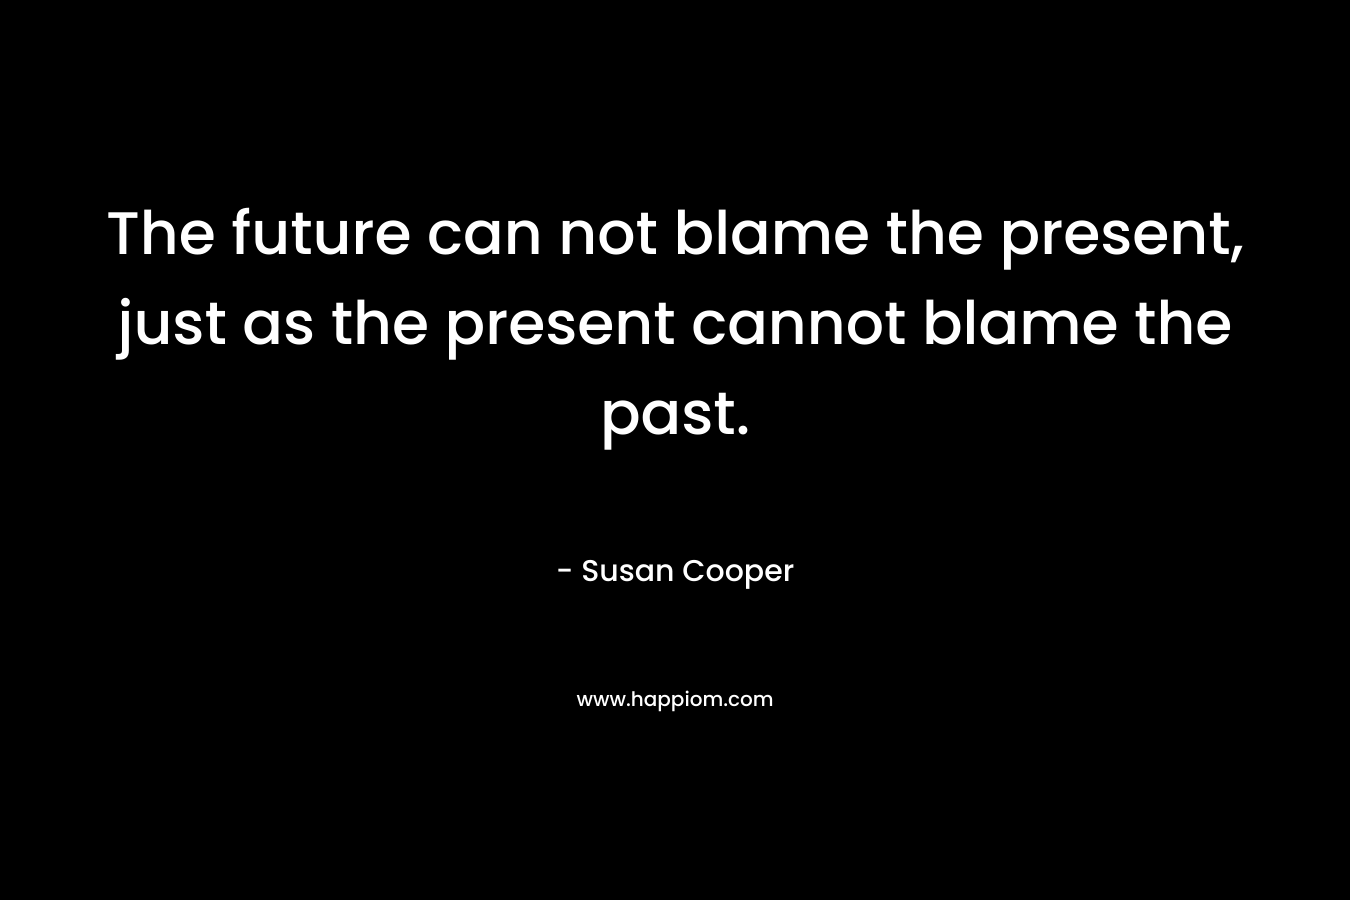 The future can not blame the present, just as the present cannot blame the past.